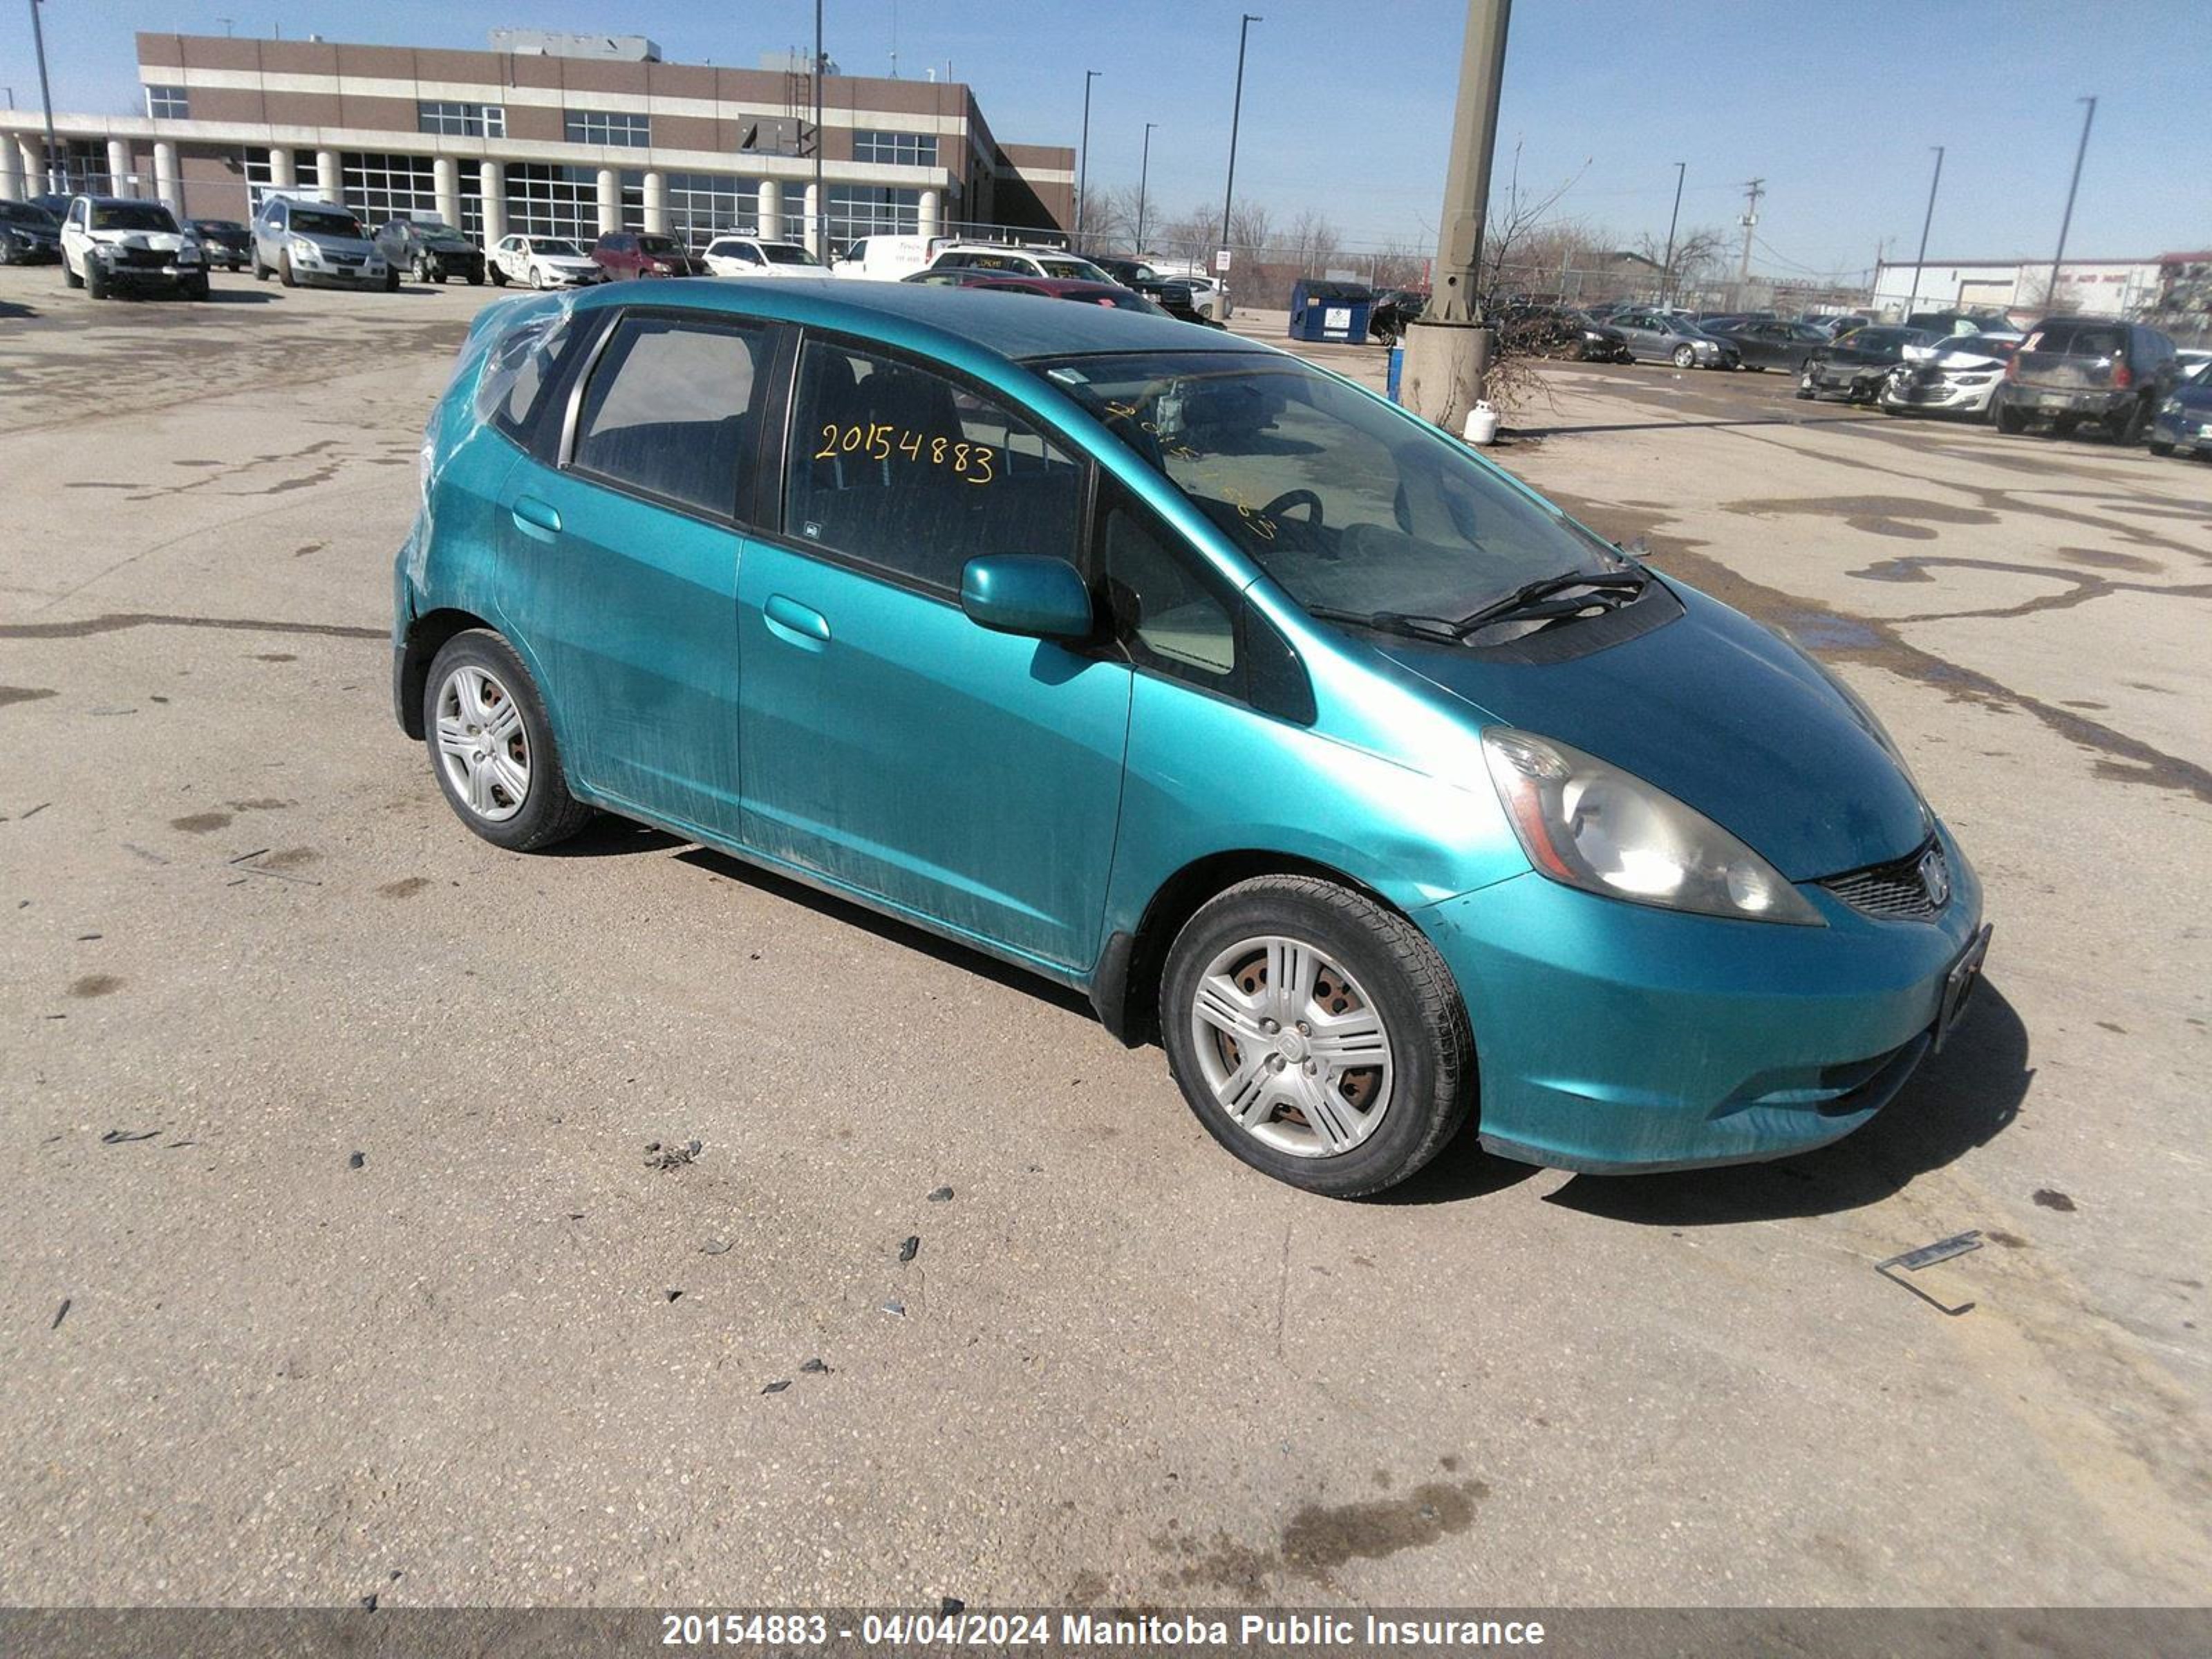 vin: LUCGE8G52D3000176 LUCGE8G52D3000176 2013 honda fit 0 for Sale in r2c5c7, 1981 Plessis Rd , Winnipeg, Manitoba, Canada